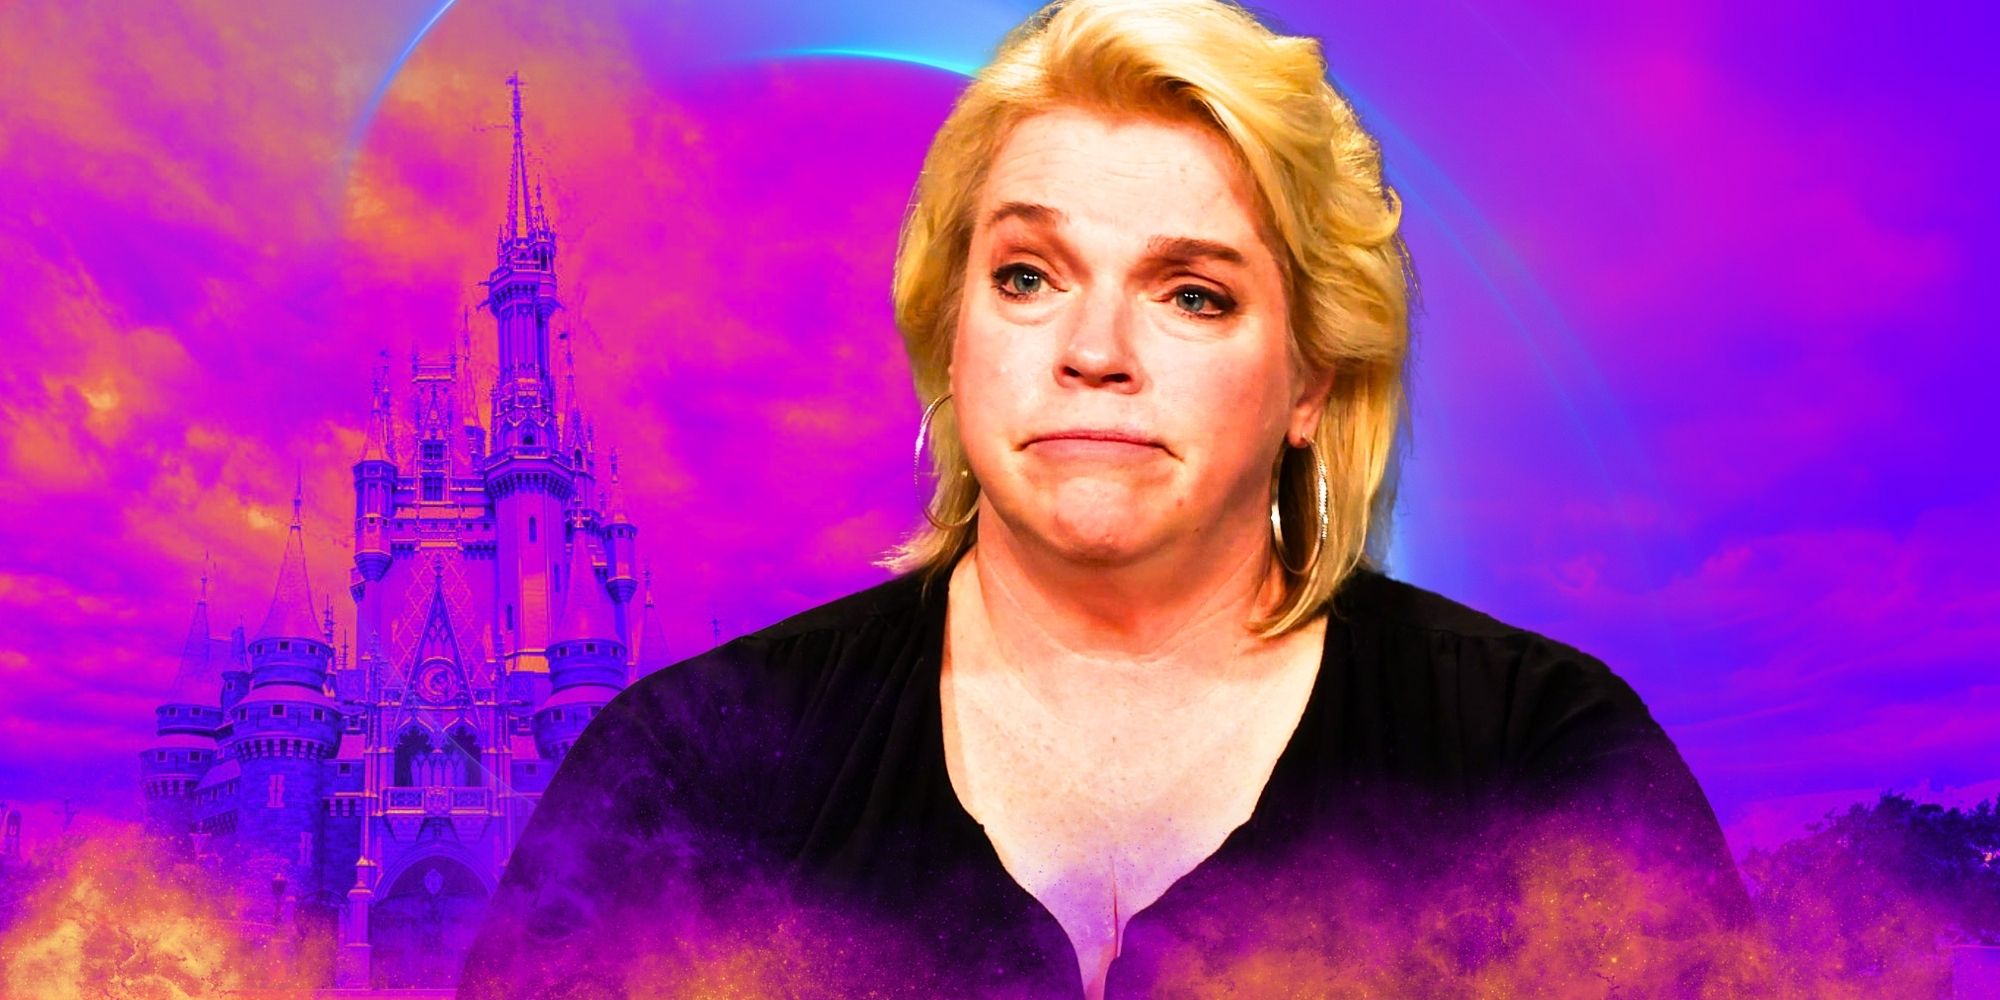 Sister Wives Star Janelle Brown, with Disney World's Cinderella Castle behind her